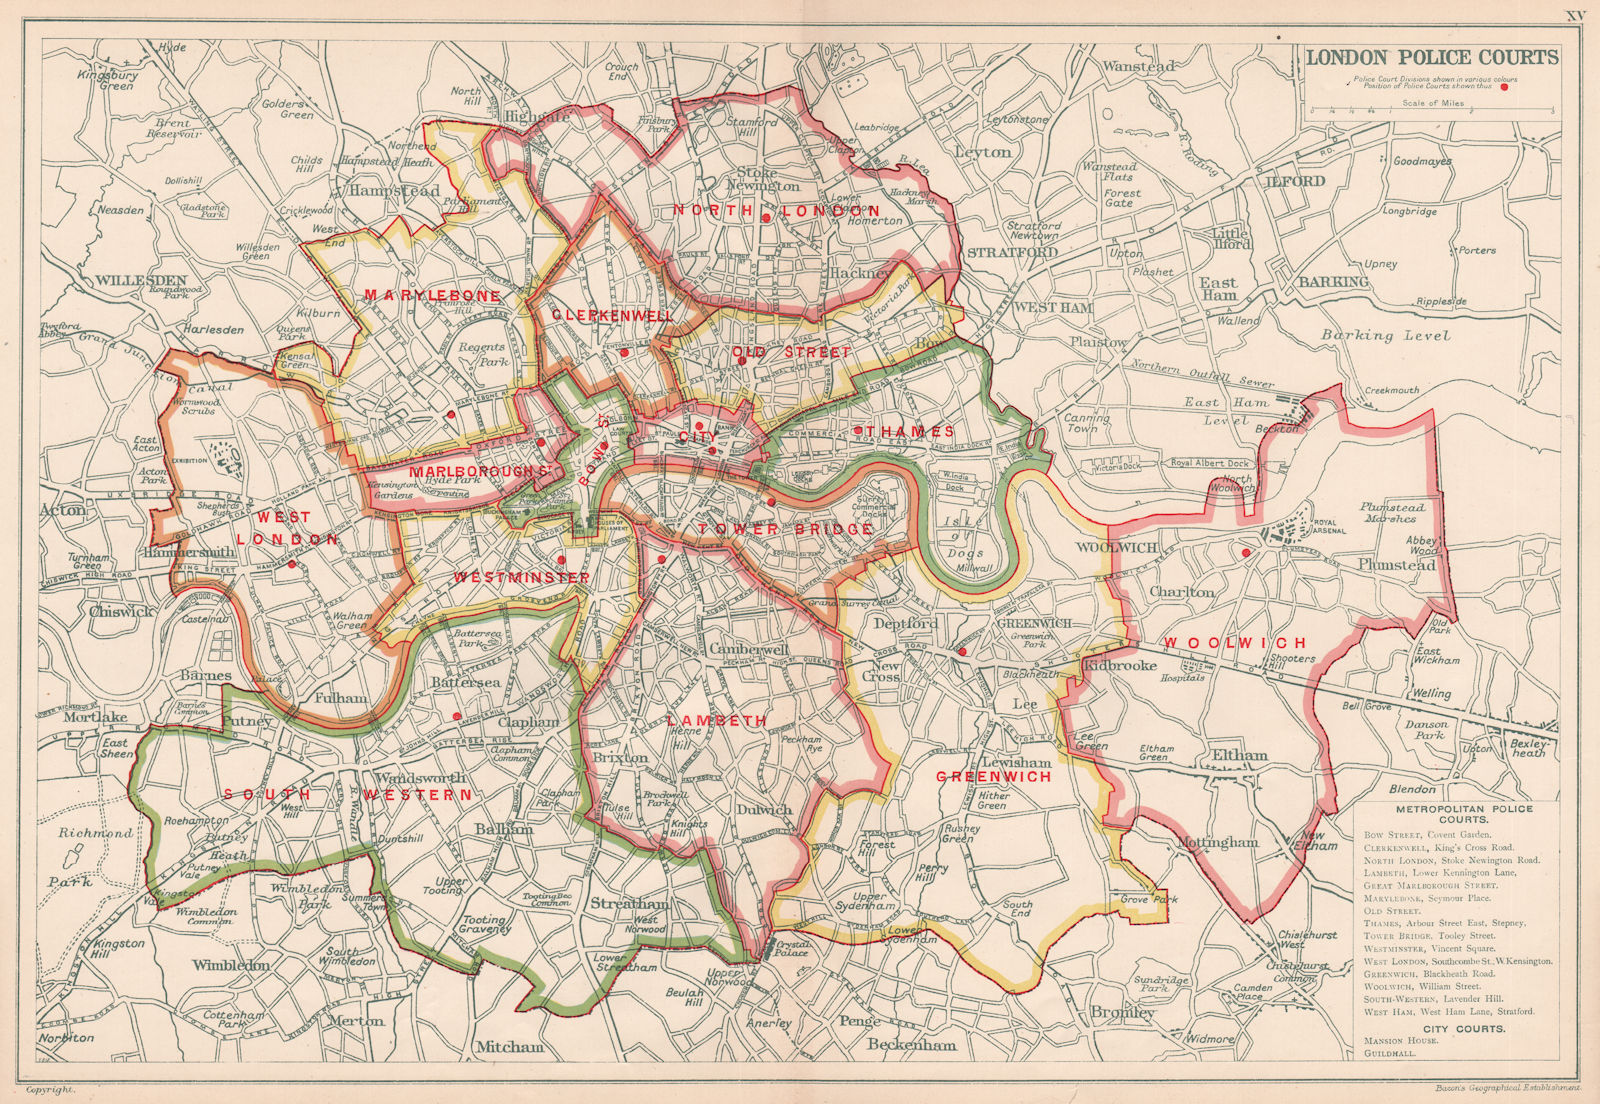 Associate Product LONDON POLICE COURTS. Showing divisions & court locations. BACON 1927 old map